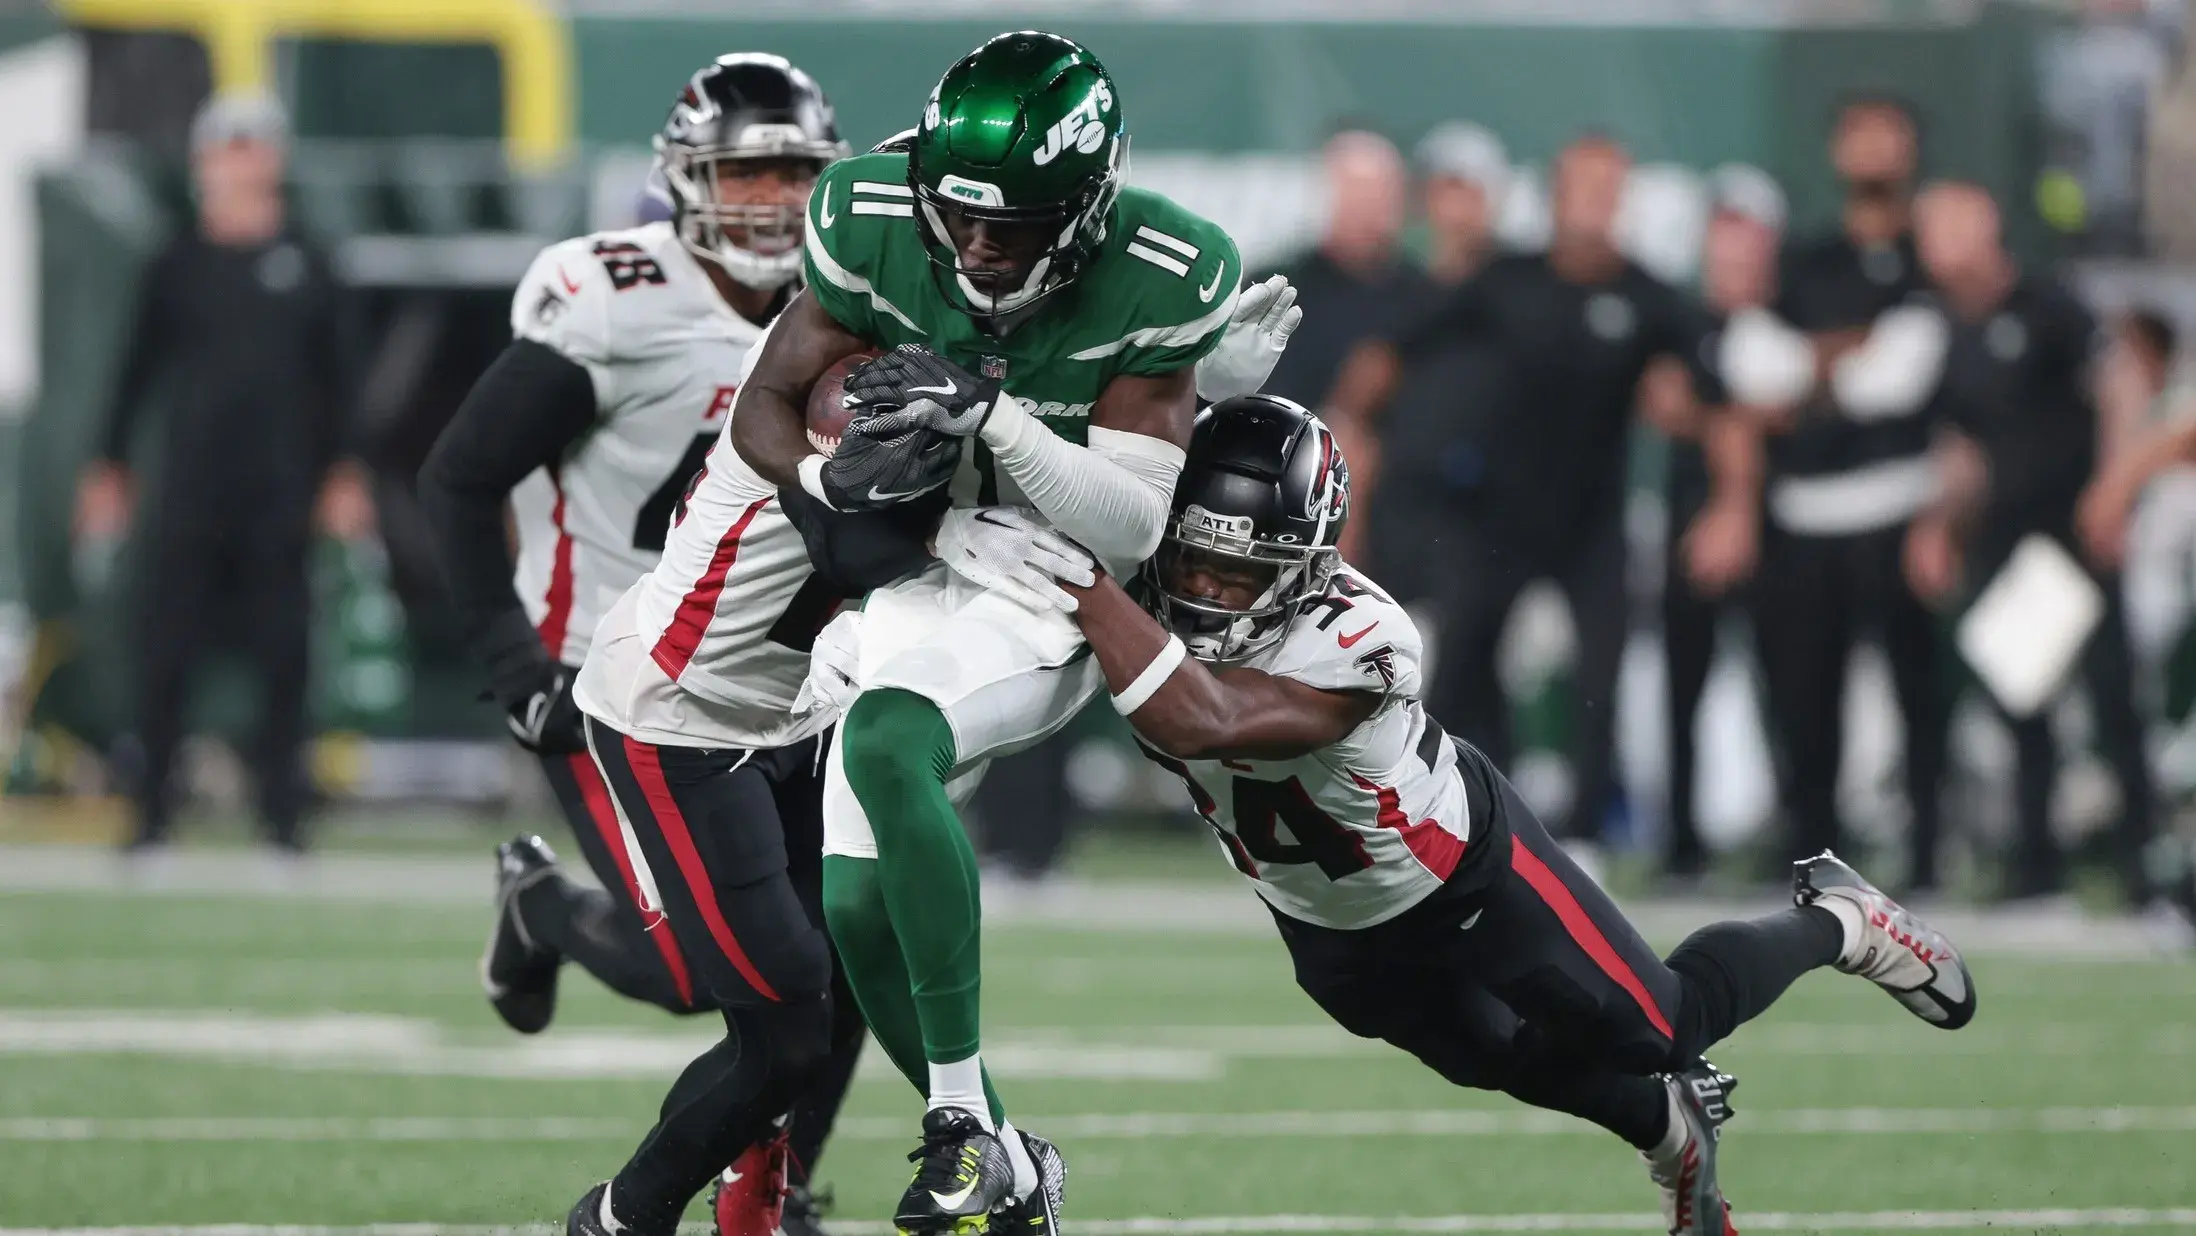 Aug 22, 2022; East Rutherford, New Jersey, USA; New York Jets wide receiver Denzel Mims (11) gains yards after the catch as Atlanta Falcons cornerback Darren Hall (34) tackles during the first half at MetLife Stadium. / Vincent Carchietta-USA TODAY Sports